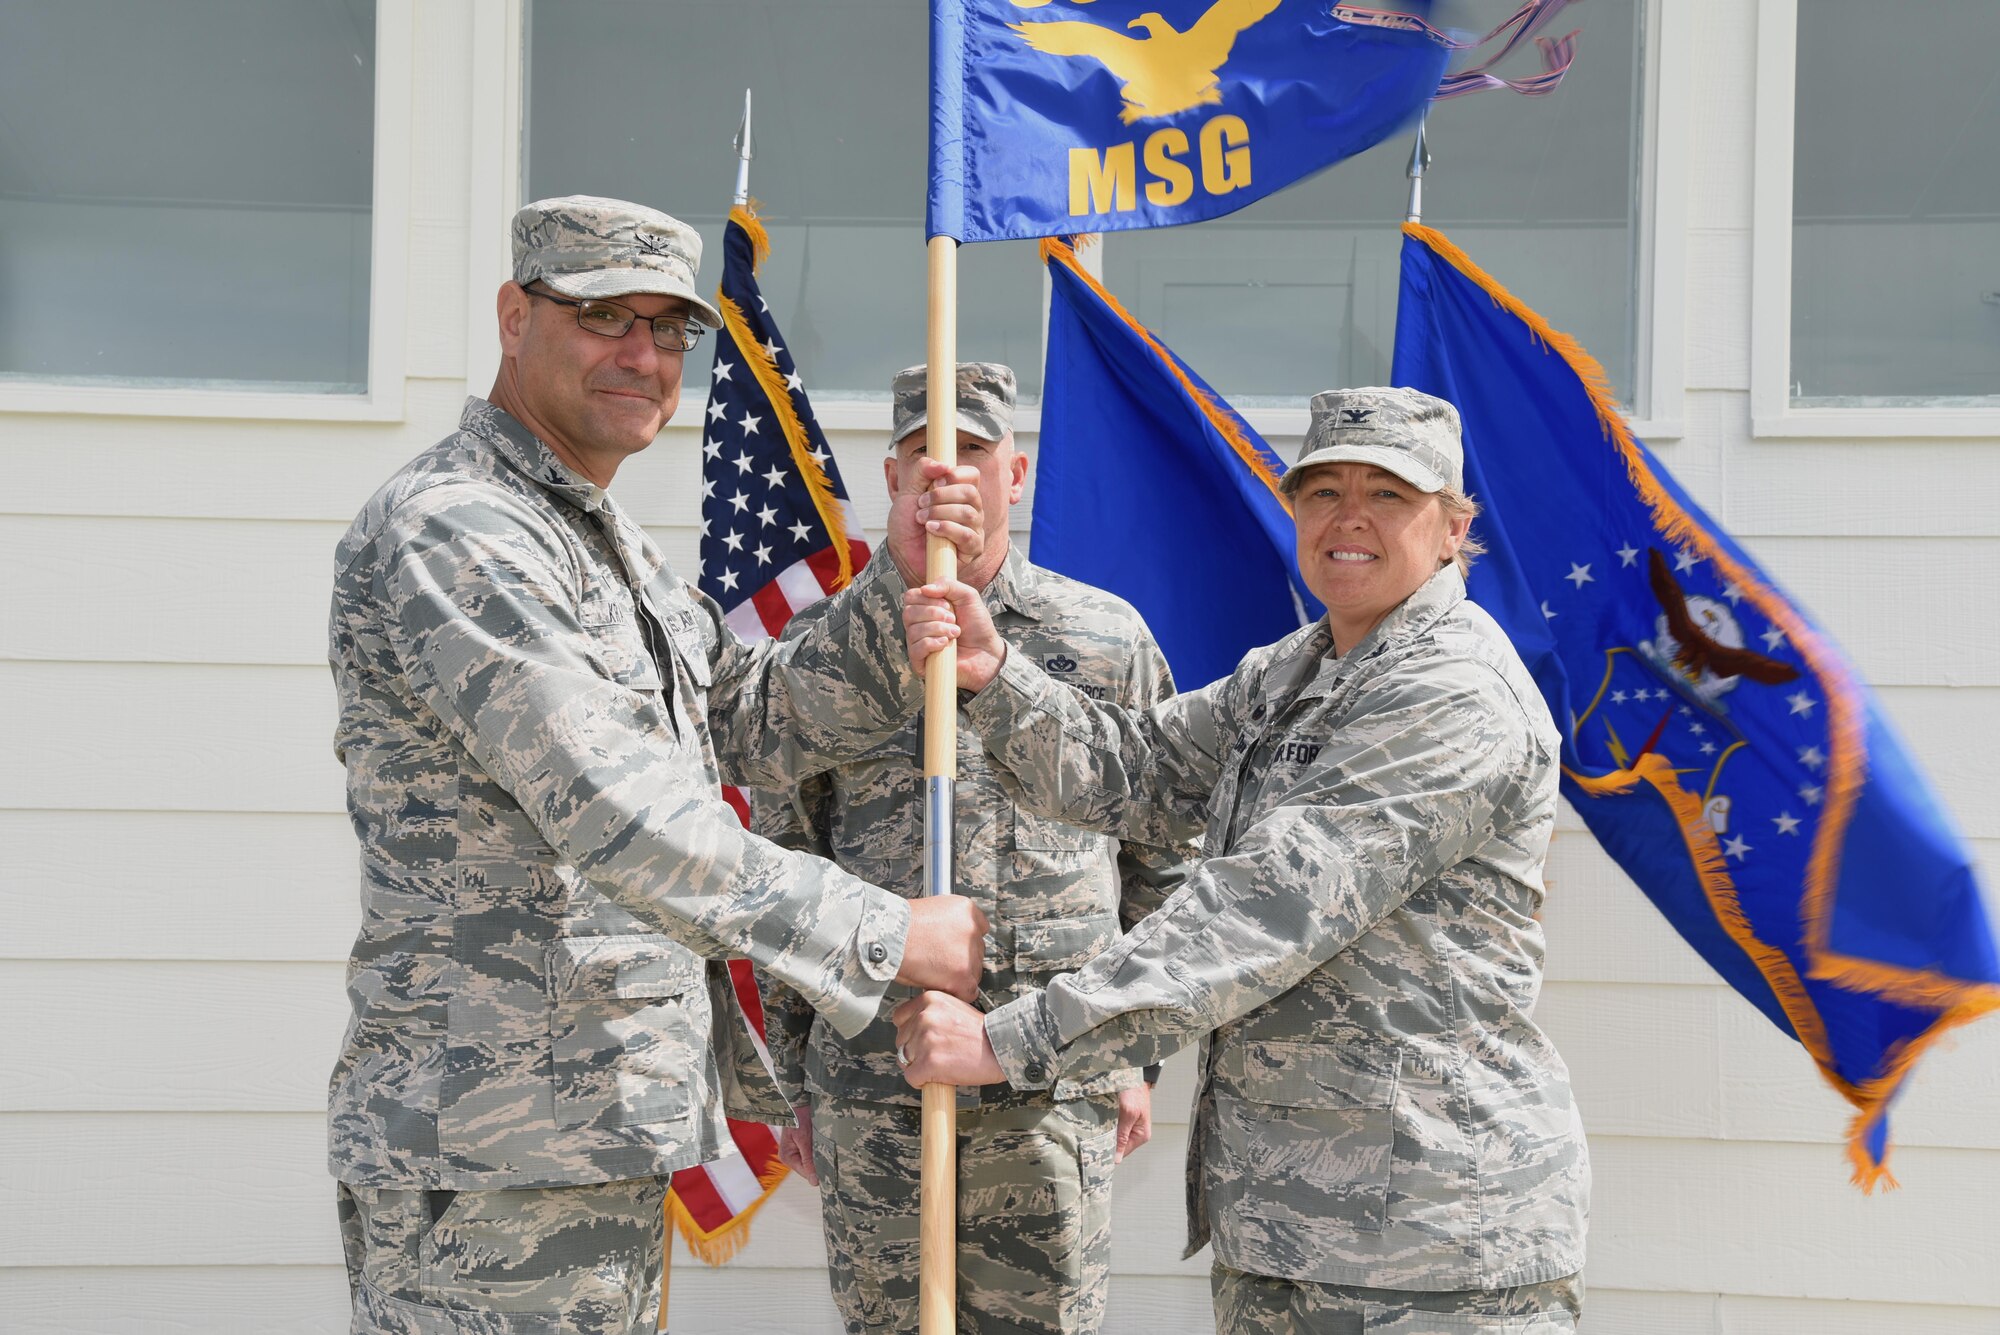 Colonel Stephen Kravitsky, 90th Missile Wing commander, passes the guidon to Col. Tricia Van Den Top, 90th Mission Support Group commander, during the 90th MSG Change of Command ceremony June 16, 2017, on the Argonne Parade Field at F.E. Warren Air Force Base, Wyo. The ceremony signified the transition of command from Col. Frank Verdugo to Van Den Top. (U.S. Air Force photo by Glenn S. Robertson)